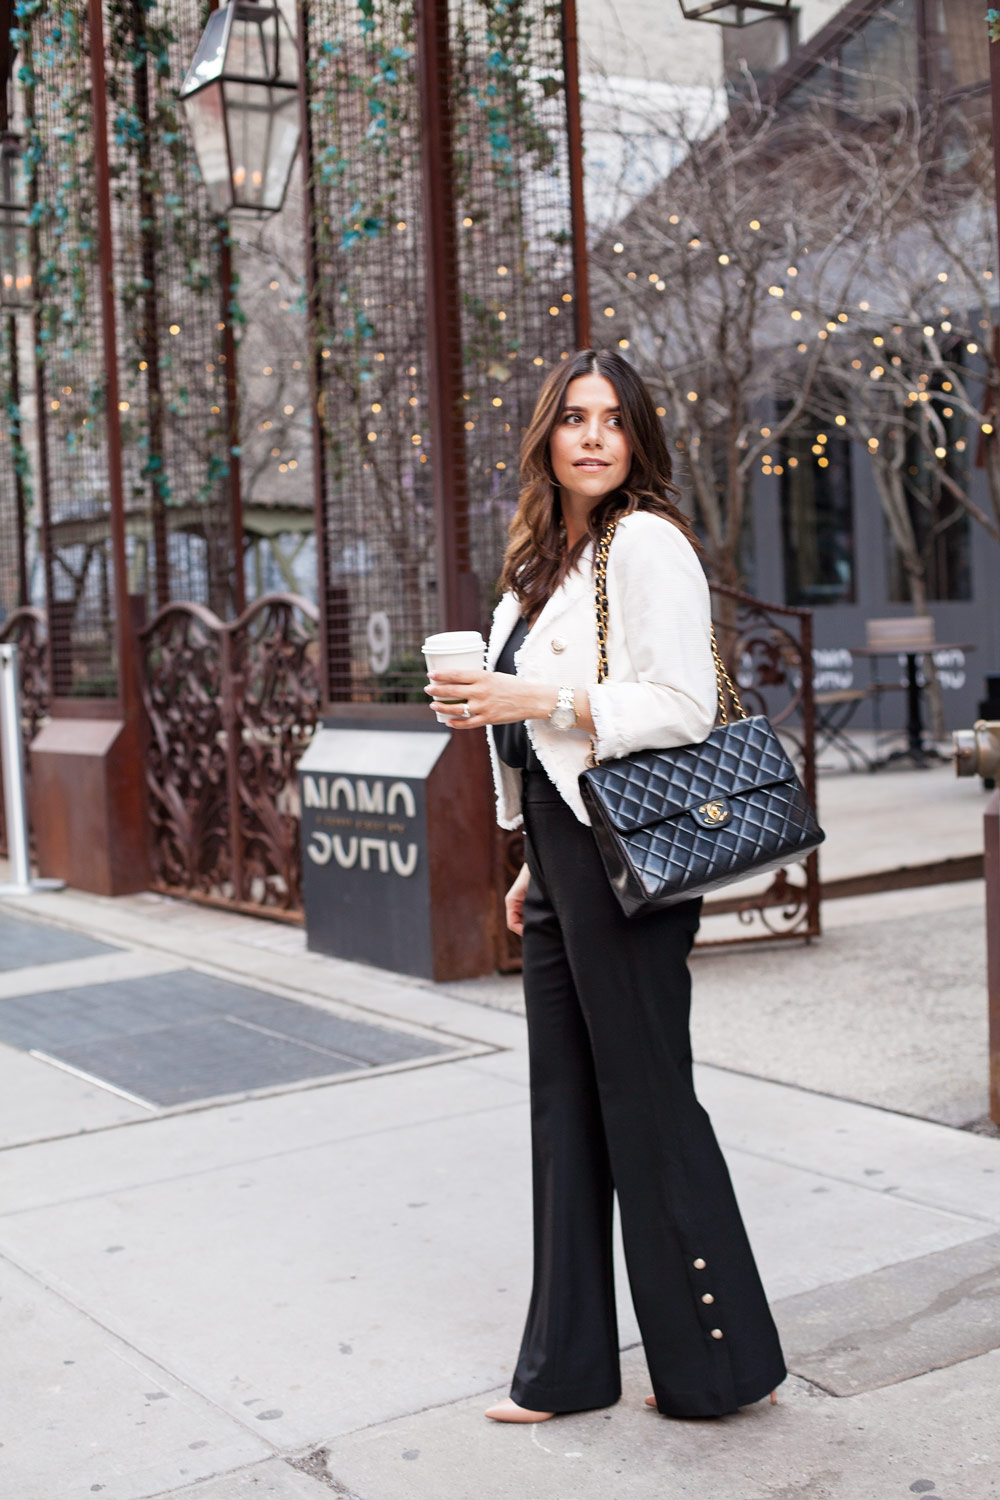 White House Black Market WHBM Workwear Black and White Outfit Post What to Wear to Work Black Wide Leg Pants Tweed Jacket New York City Fashion Blogger